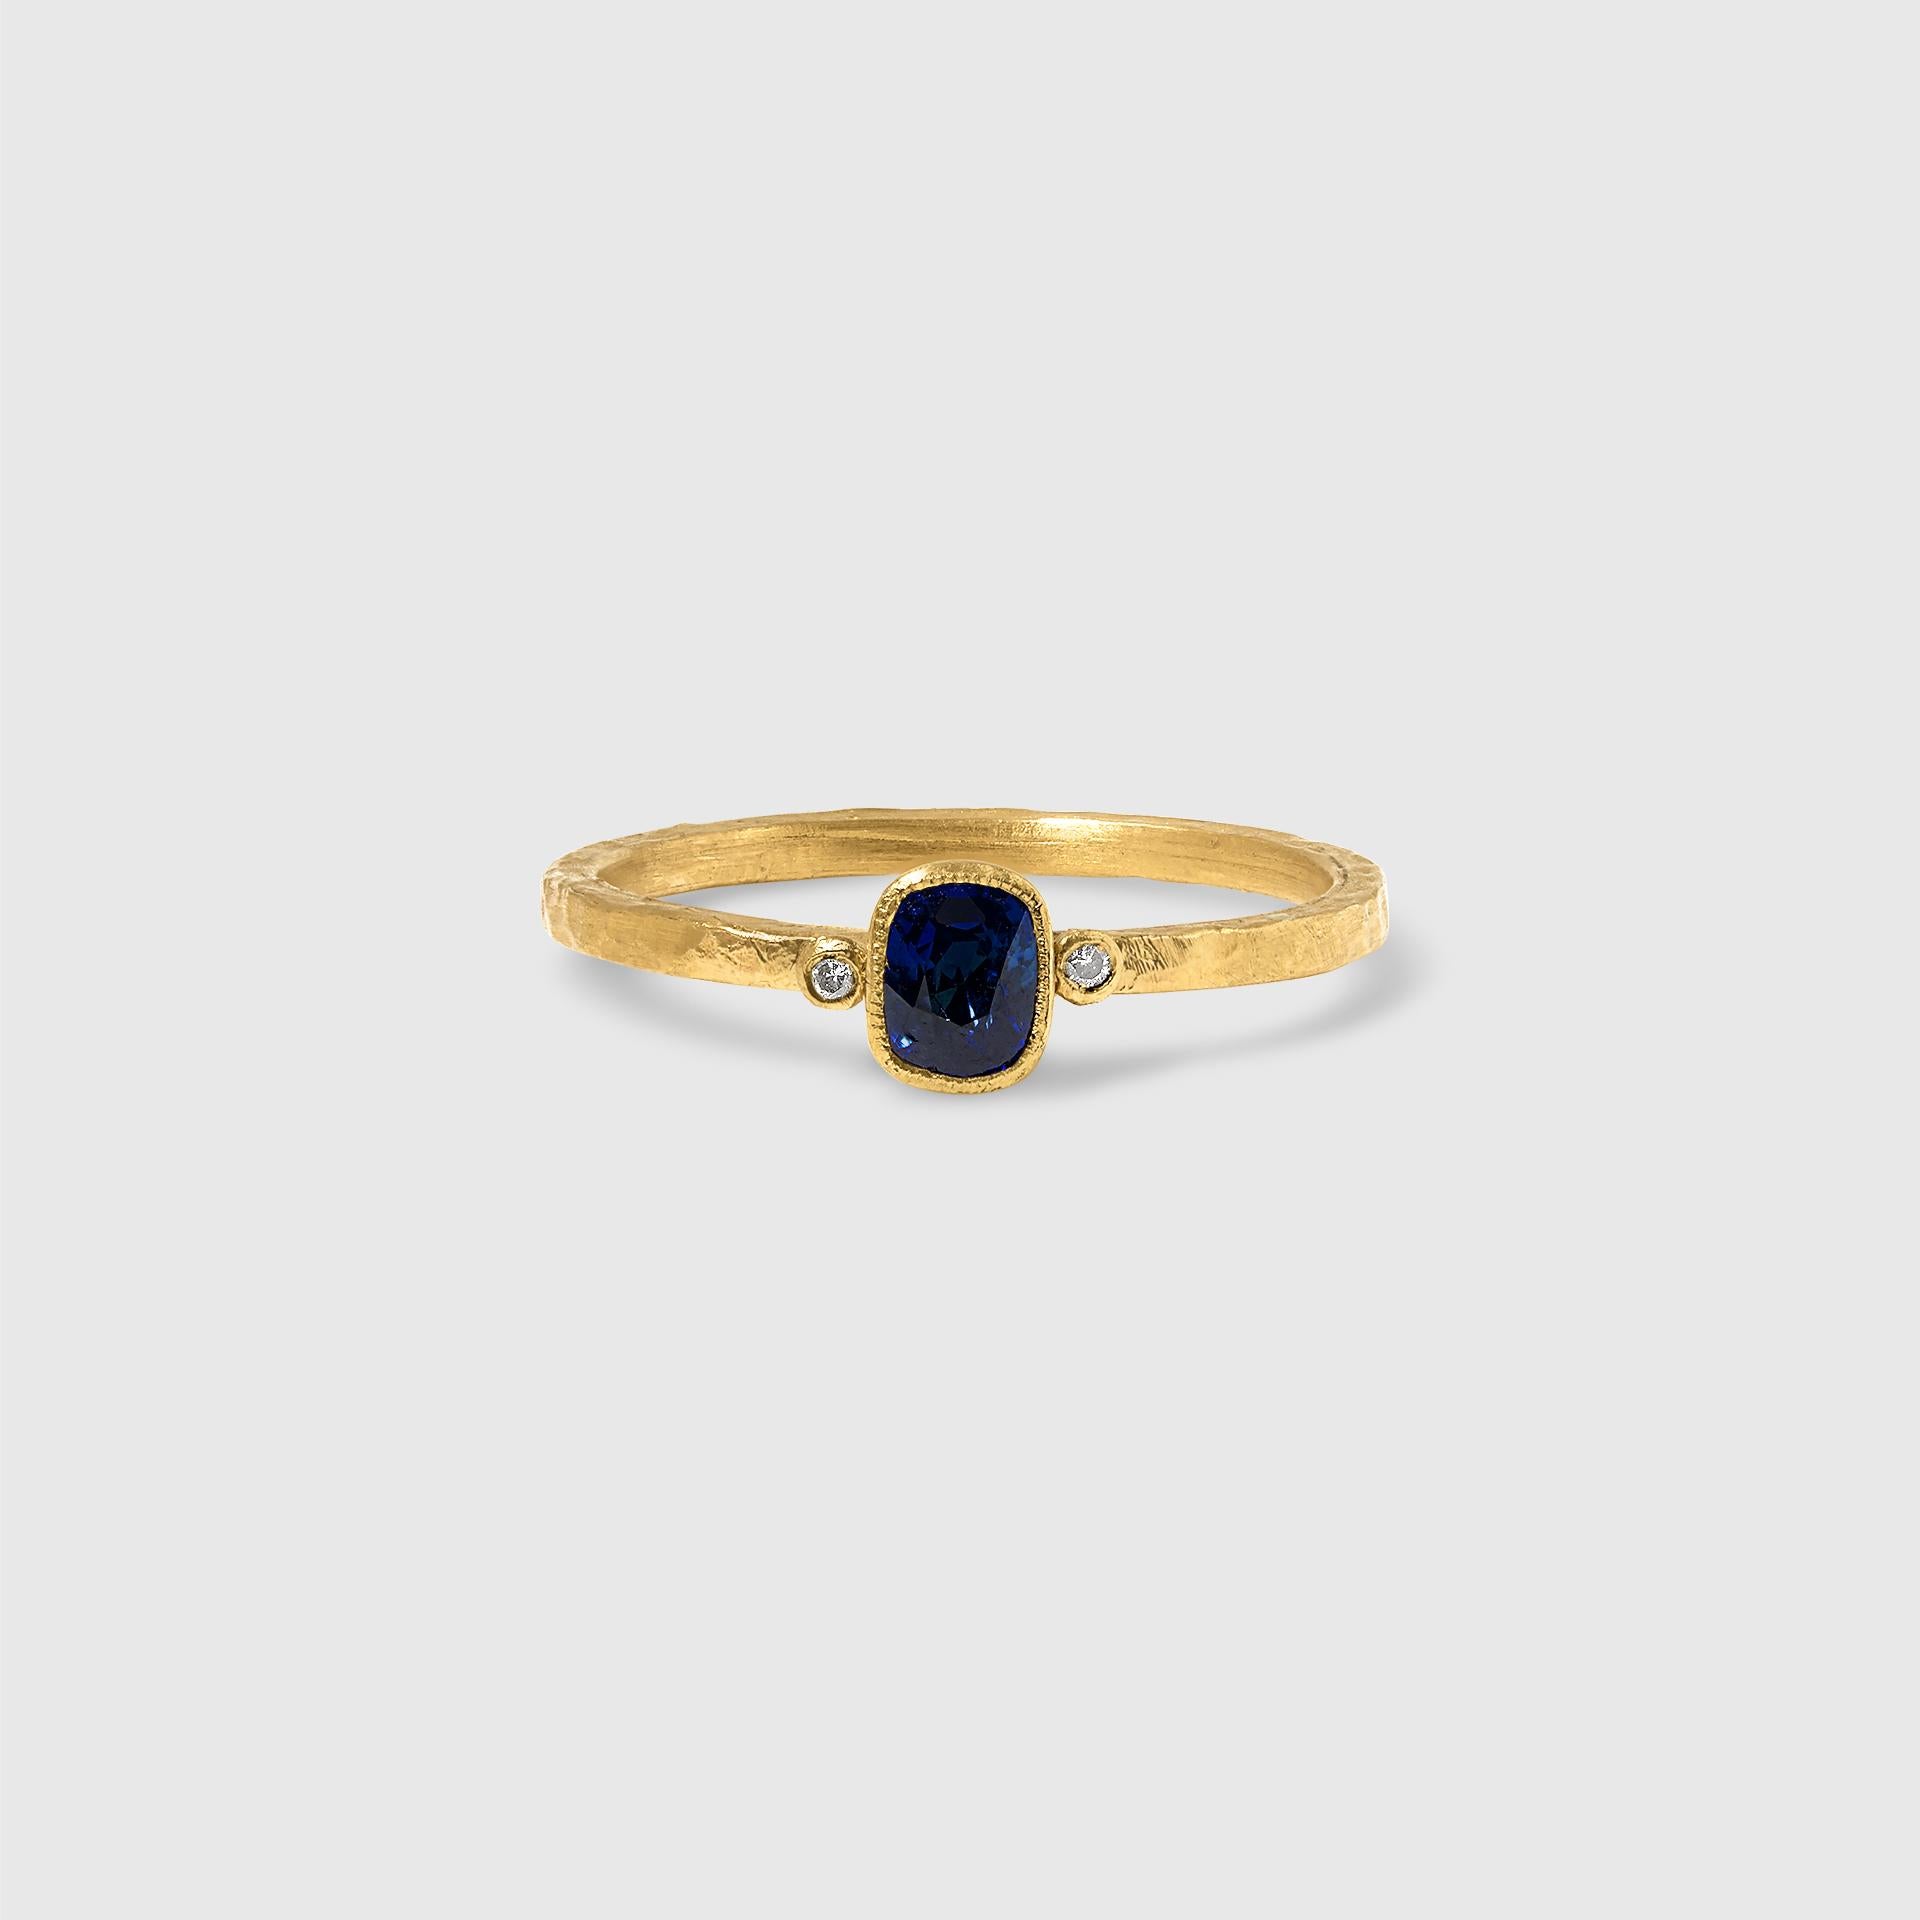 24kt Solid Gold Ring with Dark Blue Sapphire and Diamonds by Prehistoric Works of Istanbul, Turkey. Size 8 US